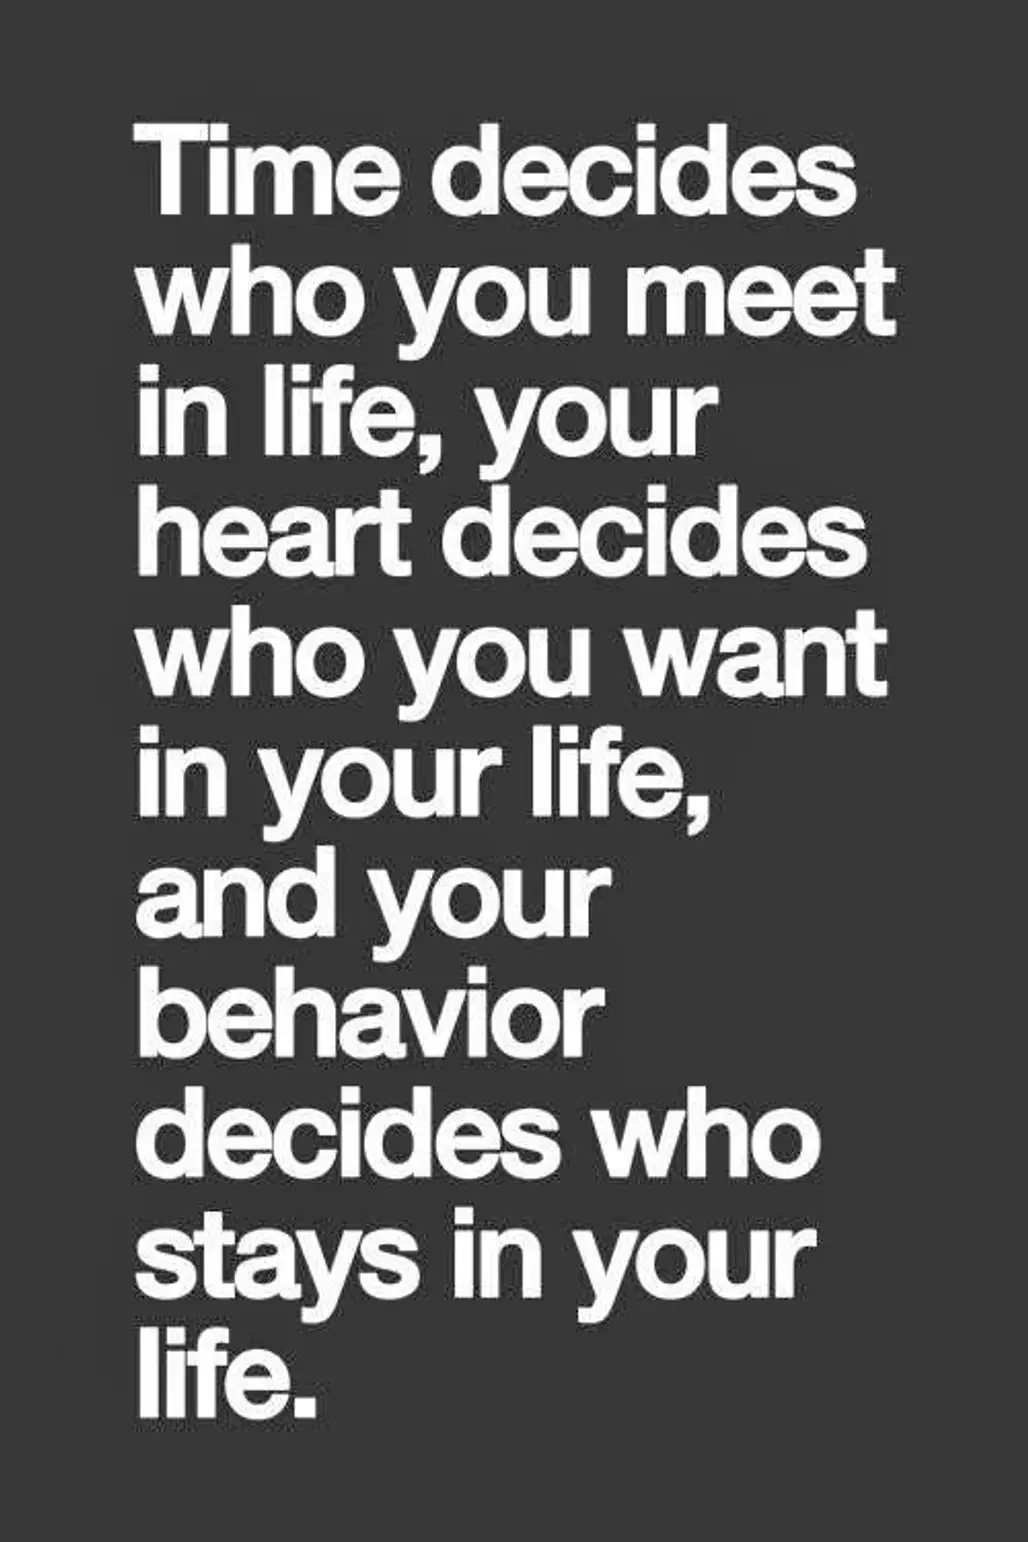 Behavior Decides Who Stays in Your Life